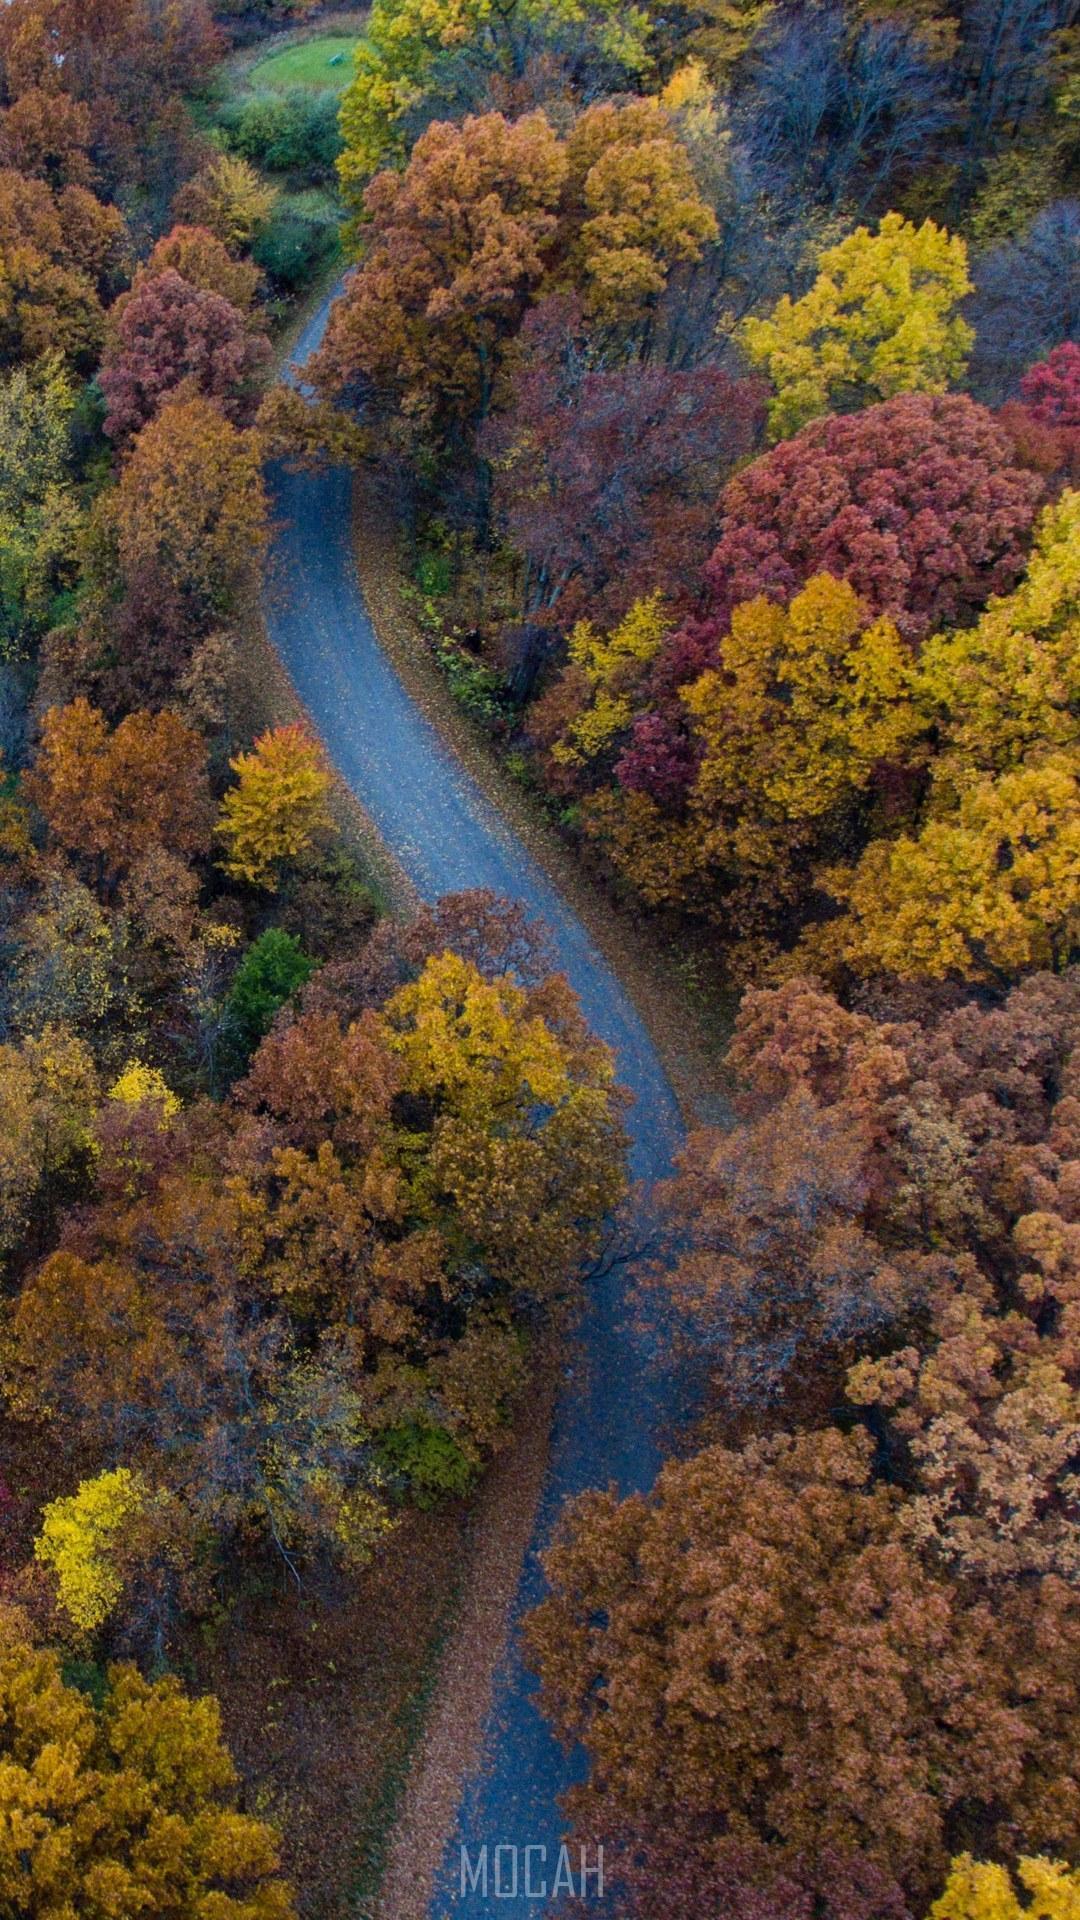 HD wallpaper, 1080X1920, A Drone Shot Of A Curve In A Road Near Autumn Colored Trees, Xiaomi Mi 4 Wallpaper Hd Free Download, Autumn Road From Above